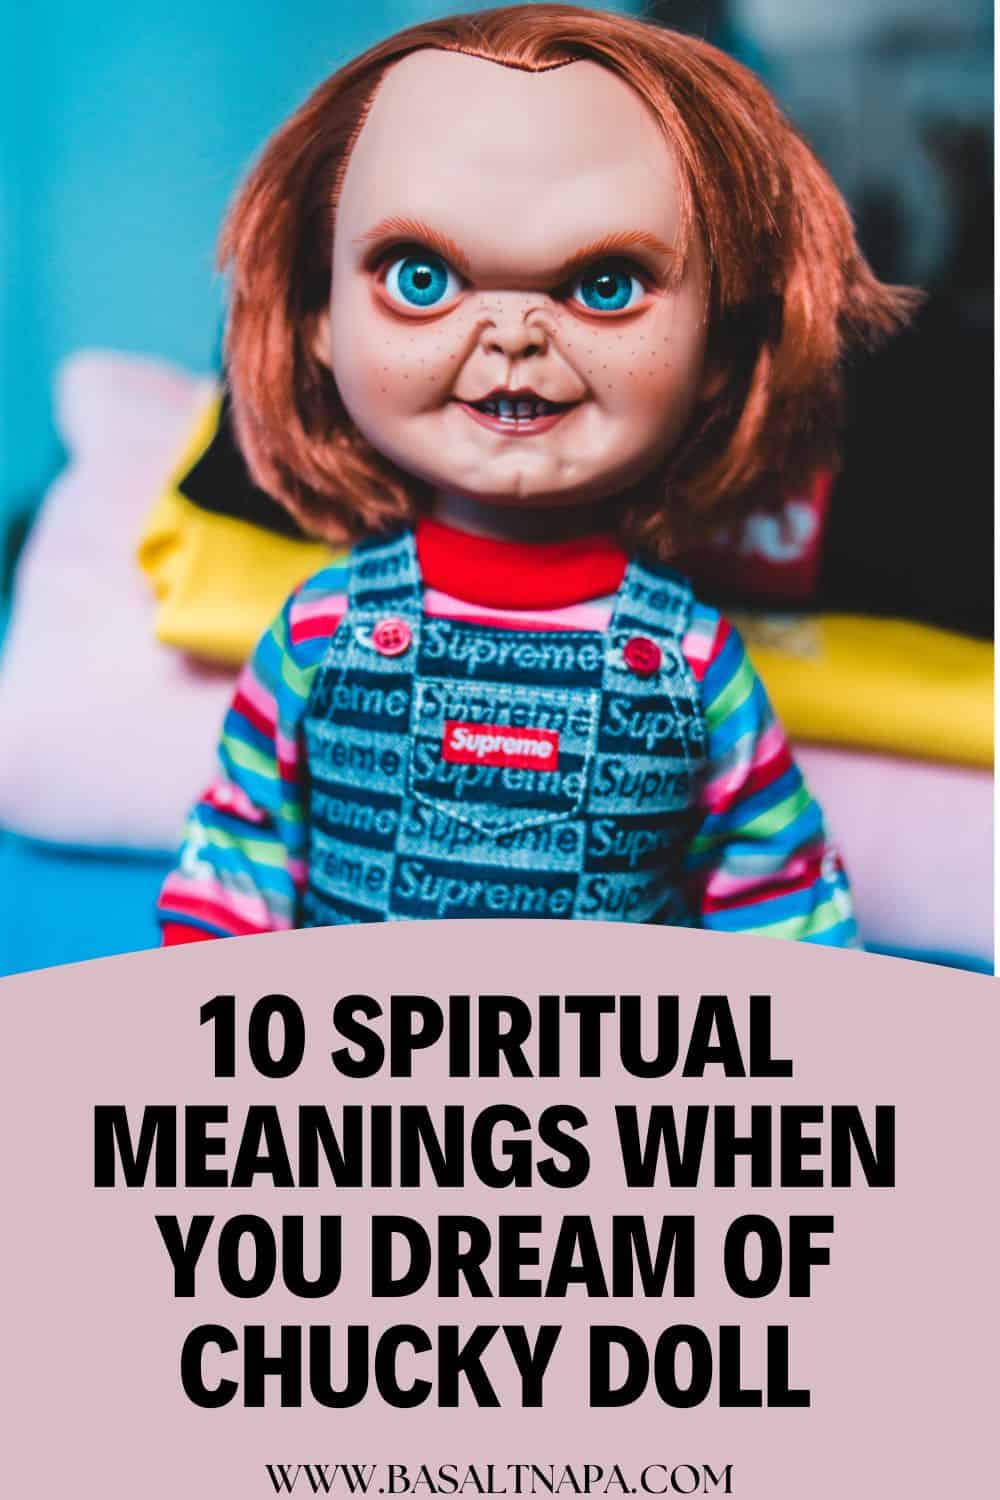 10 Spiritual Meanings When You Dream Of Chucky Doll